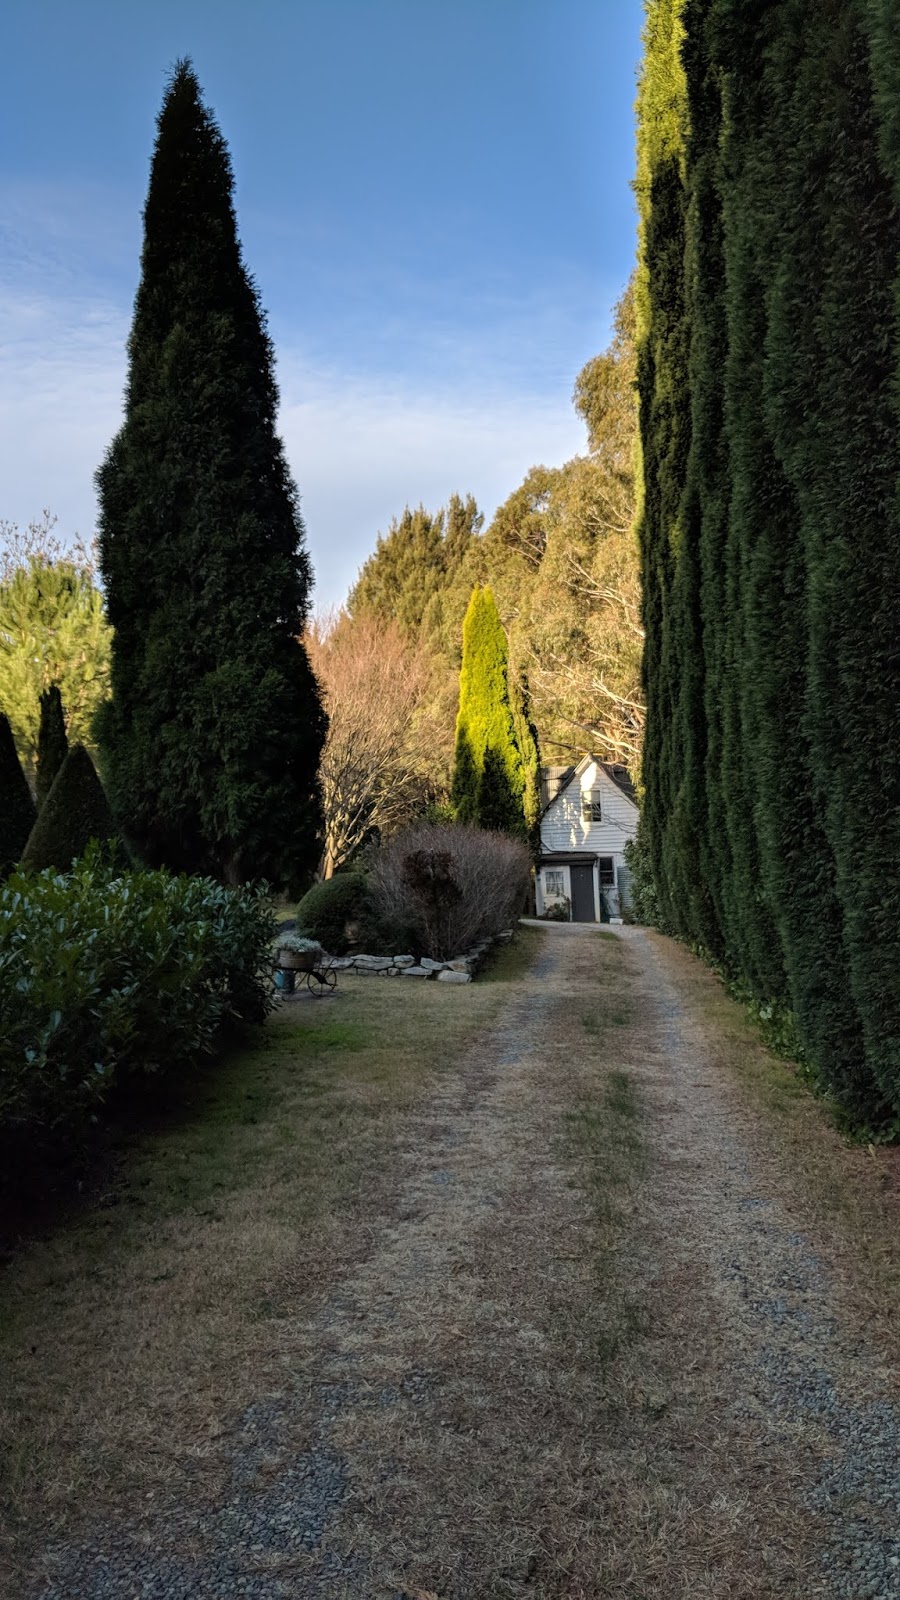 SOUTHDOWN COTTAGES - BOWRAL | lodging | 565 Moss Vale Rd, Burradoo NSW 2576, Australia | 0248615532 OR +61 2 4861 5532